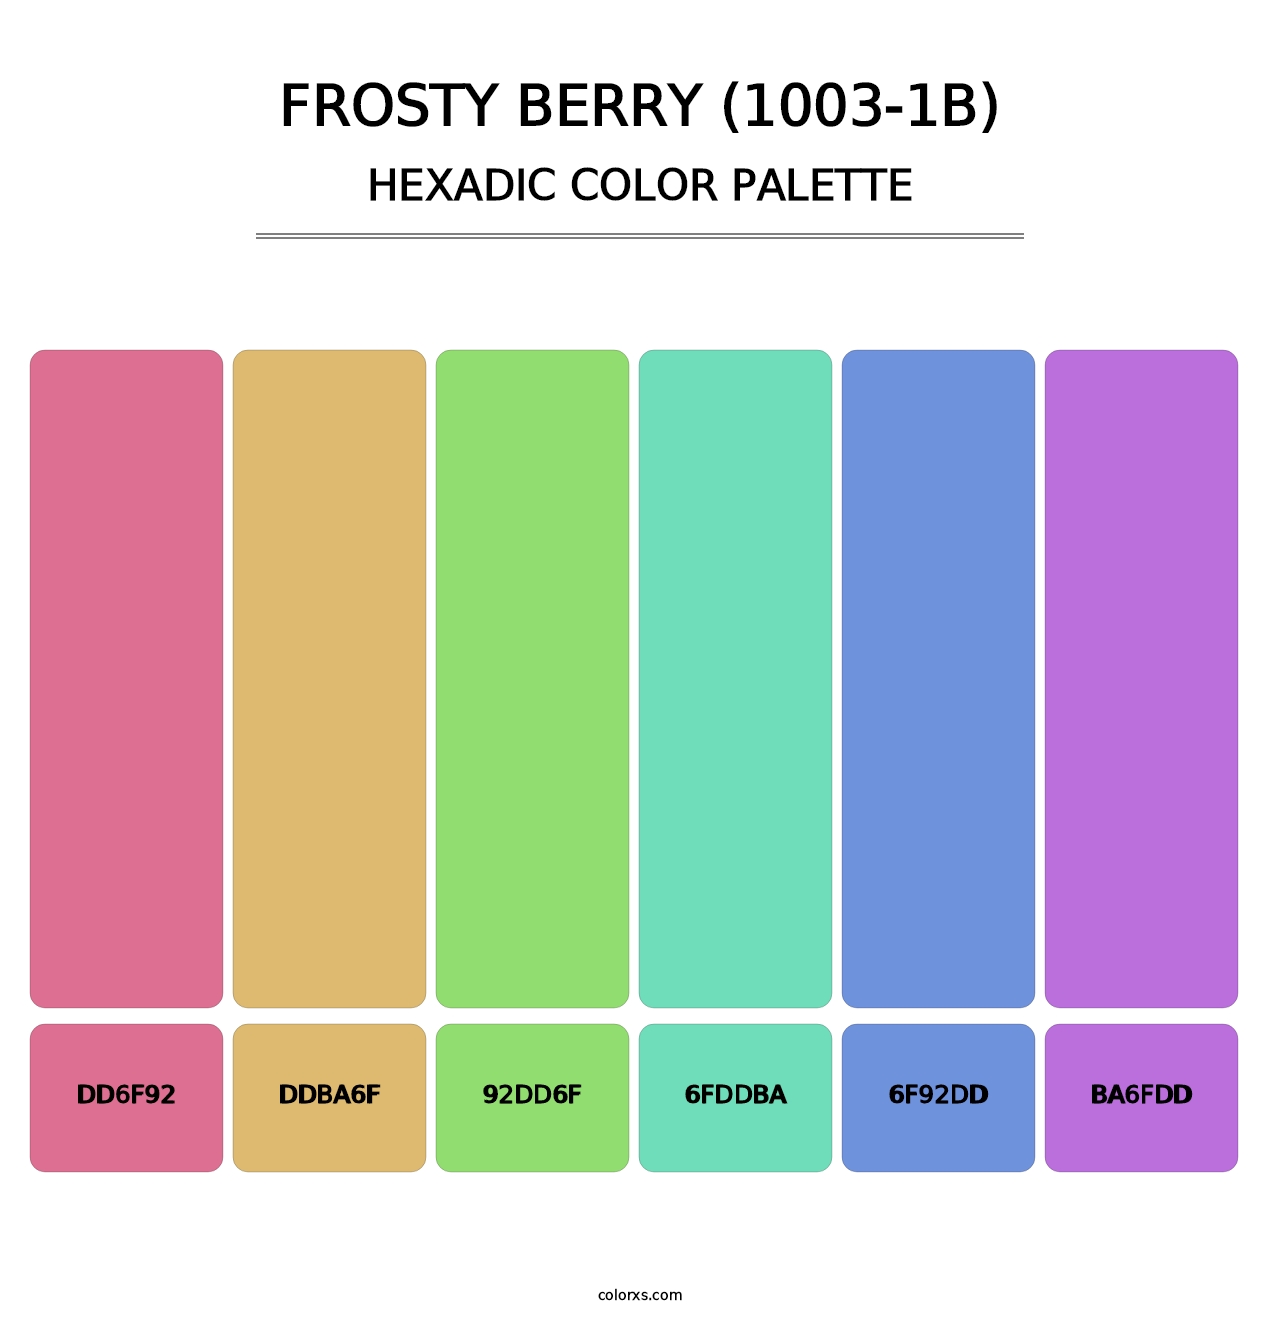 Frosty Berry (1003-1B) - Hexadic Color Palette